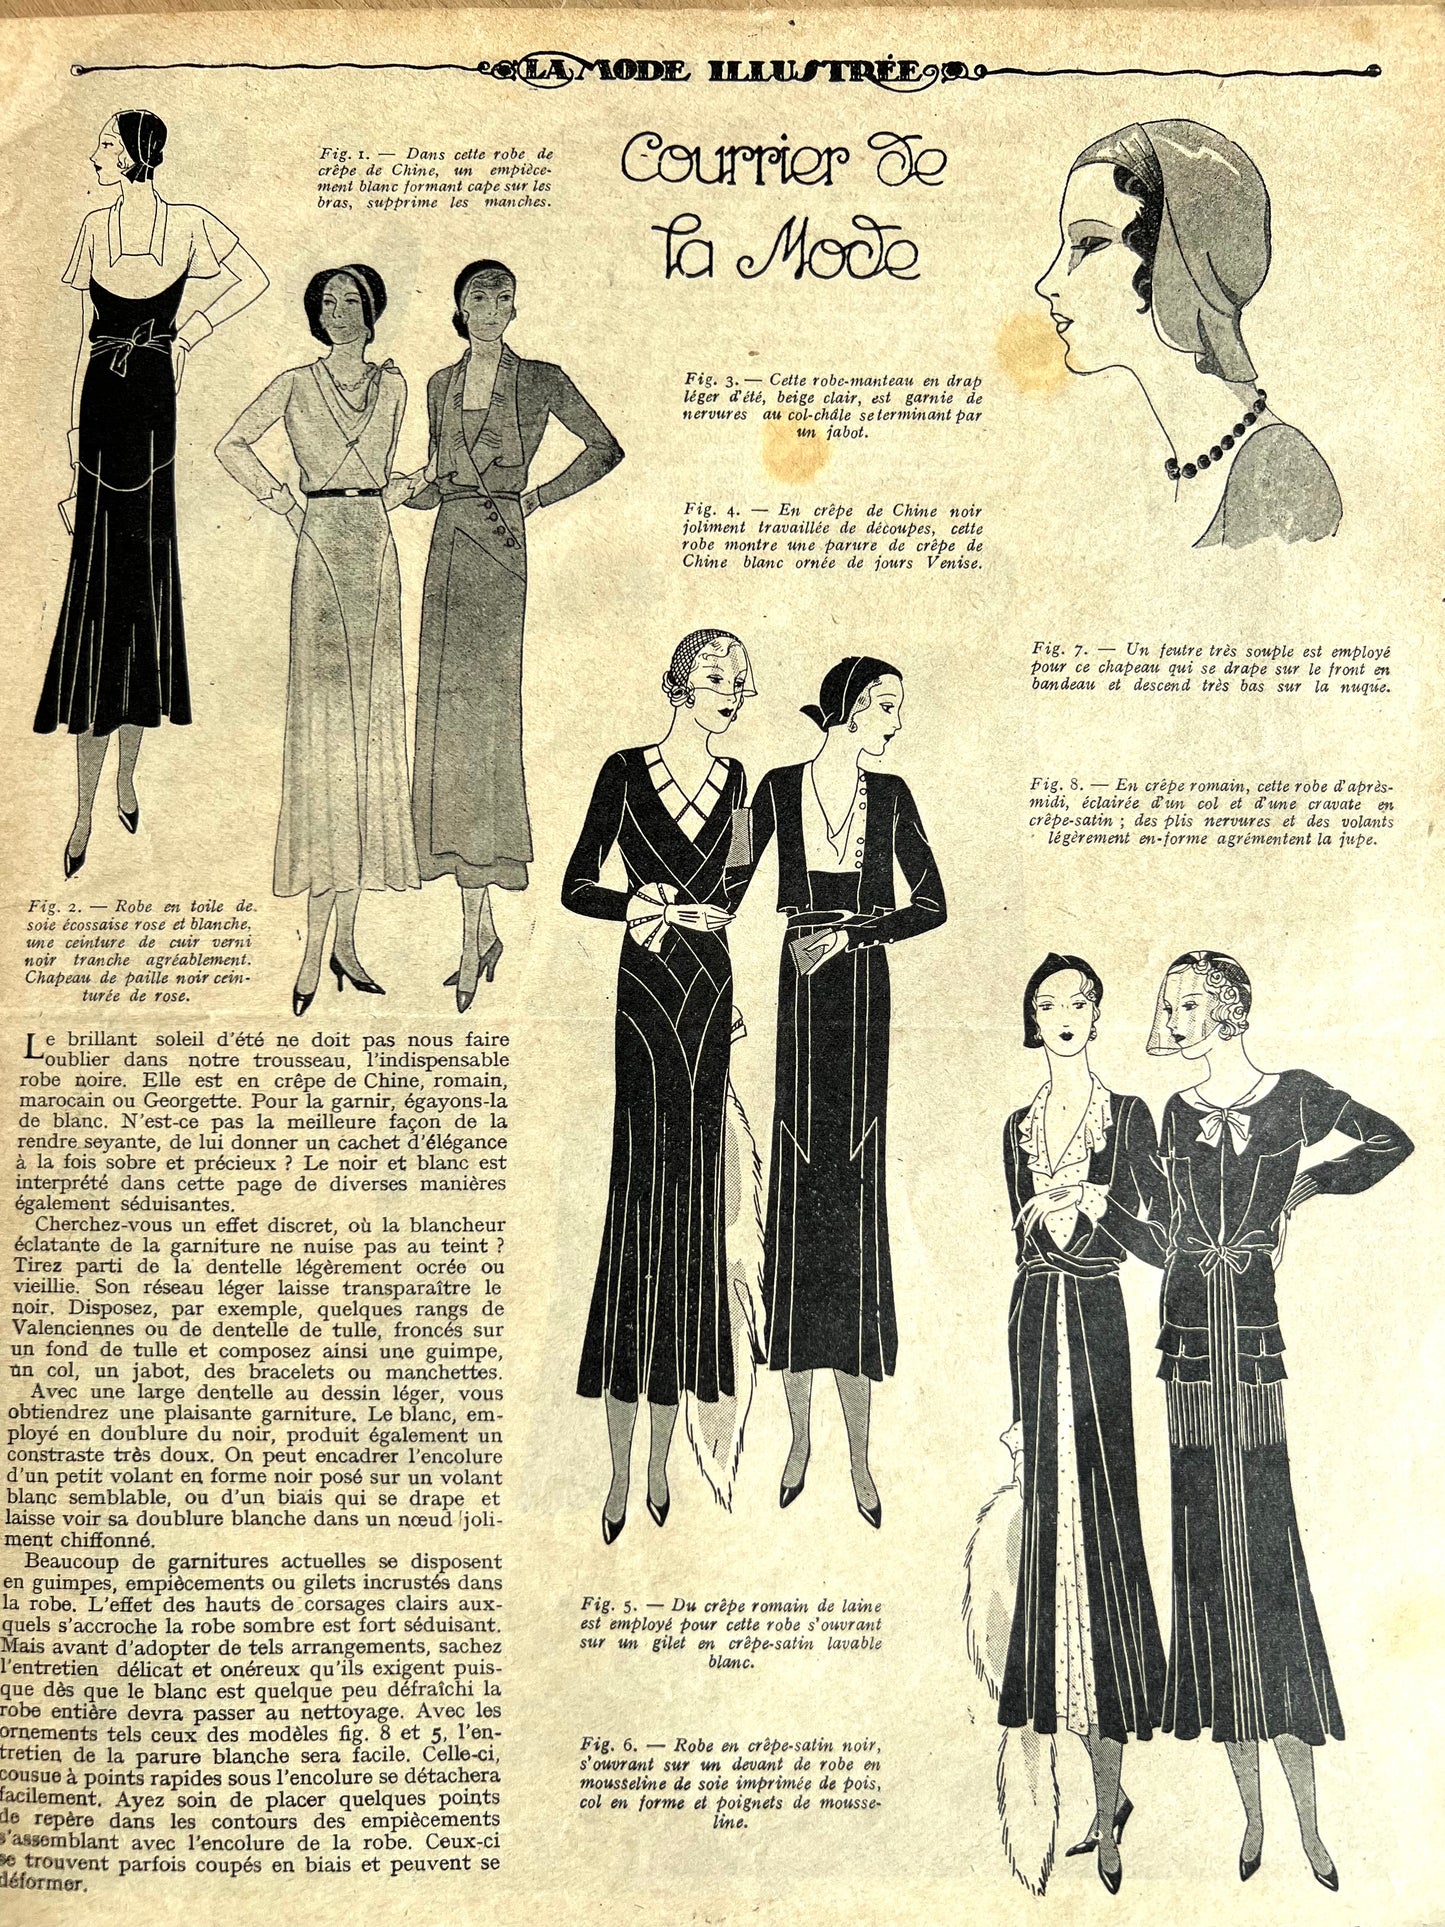 Charming Cover on June 1934 French Fashion Paper La Mode Illustree